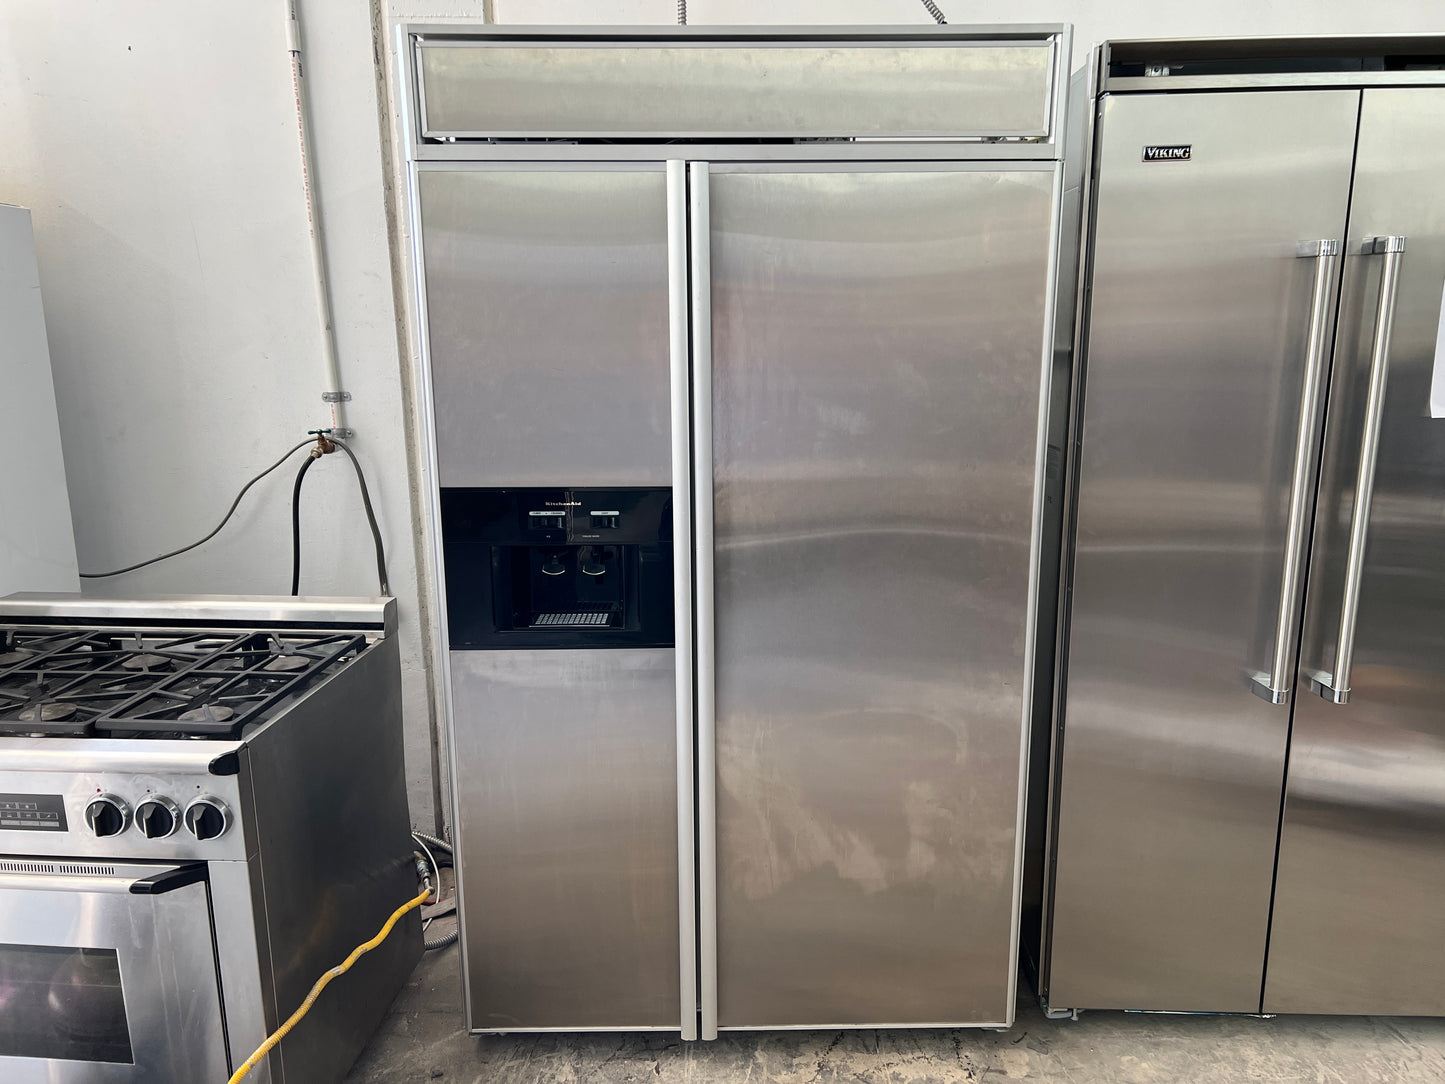 Kitchenaid 48 inch Side By Side Built in Refrigerator KSSS48QDX in Stainless Steel,Water and Ice Maker, Dispenser,369151